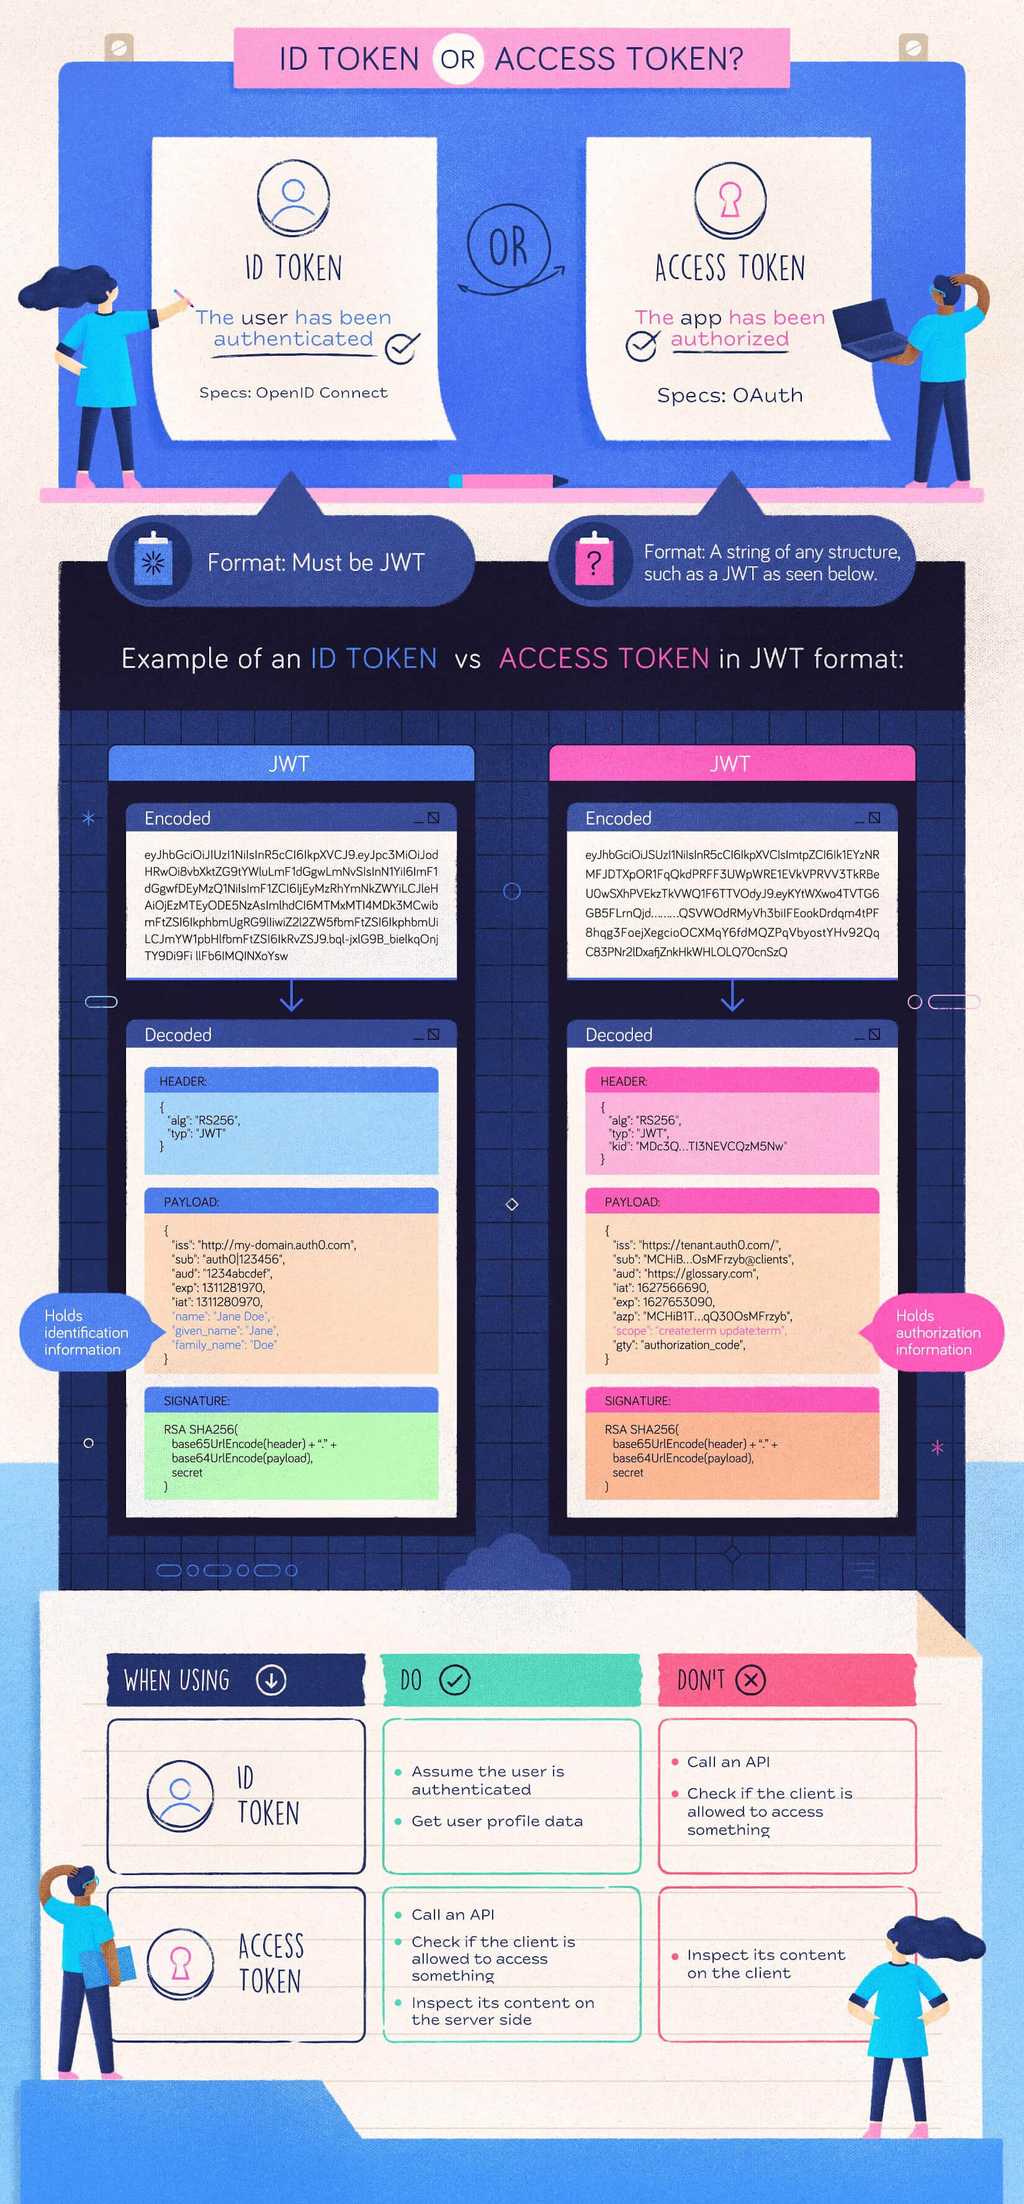 ID Token and Access Token: What's the Difference?